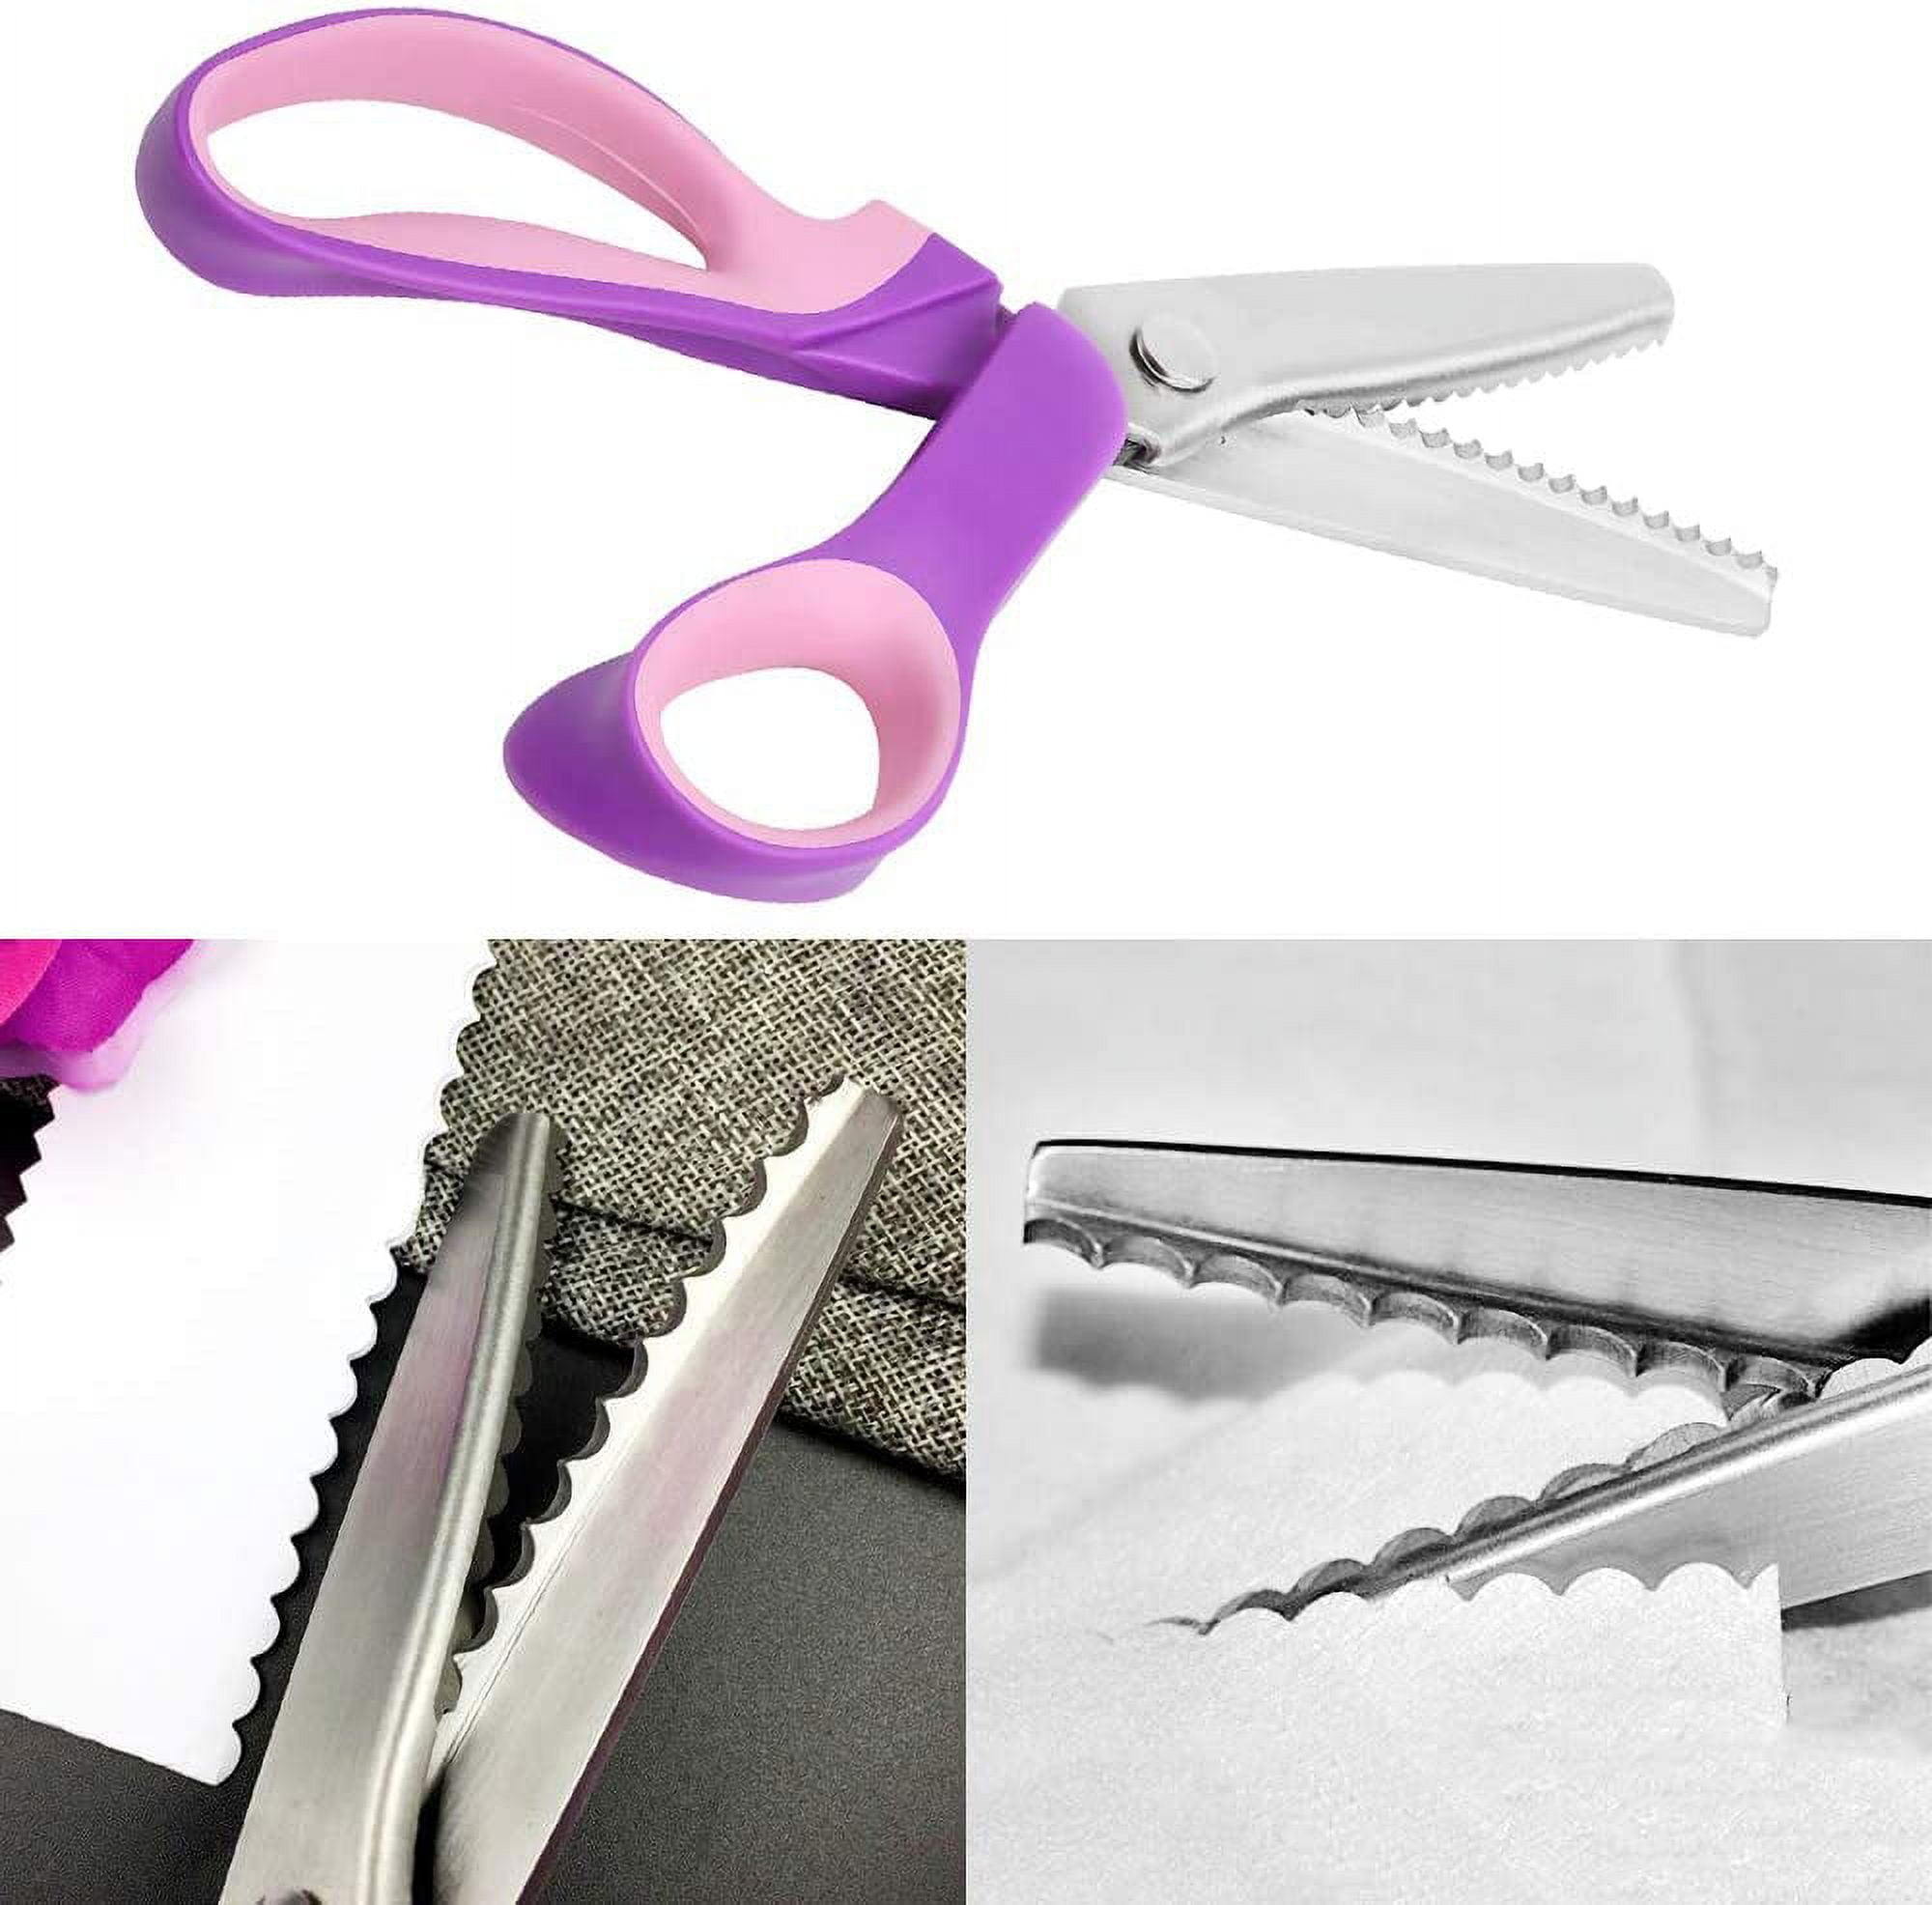 Pinking Shears Stainless Steel Zigzag Handled Professional Dressmaking  Sewing Scissors Scalloped Fabric Craft Scissors 